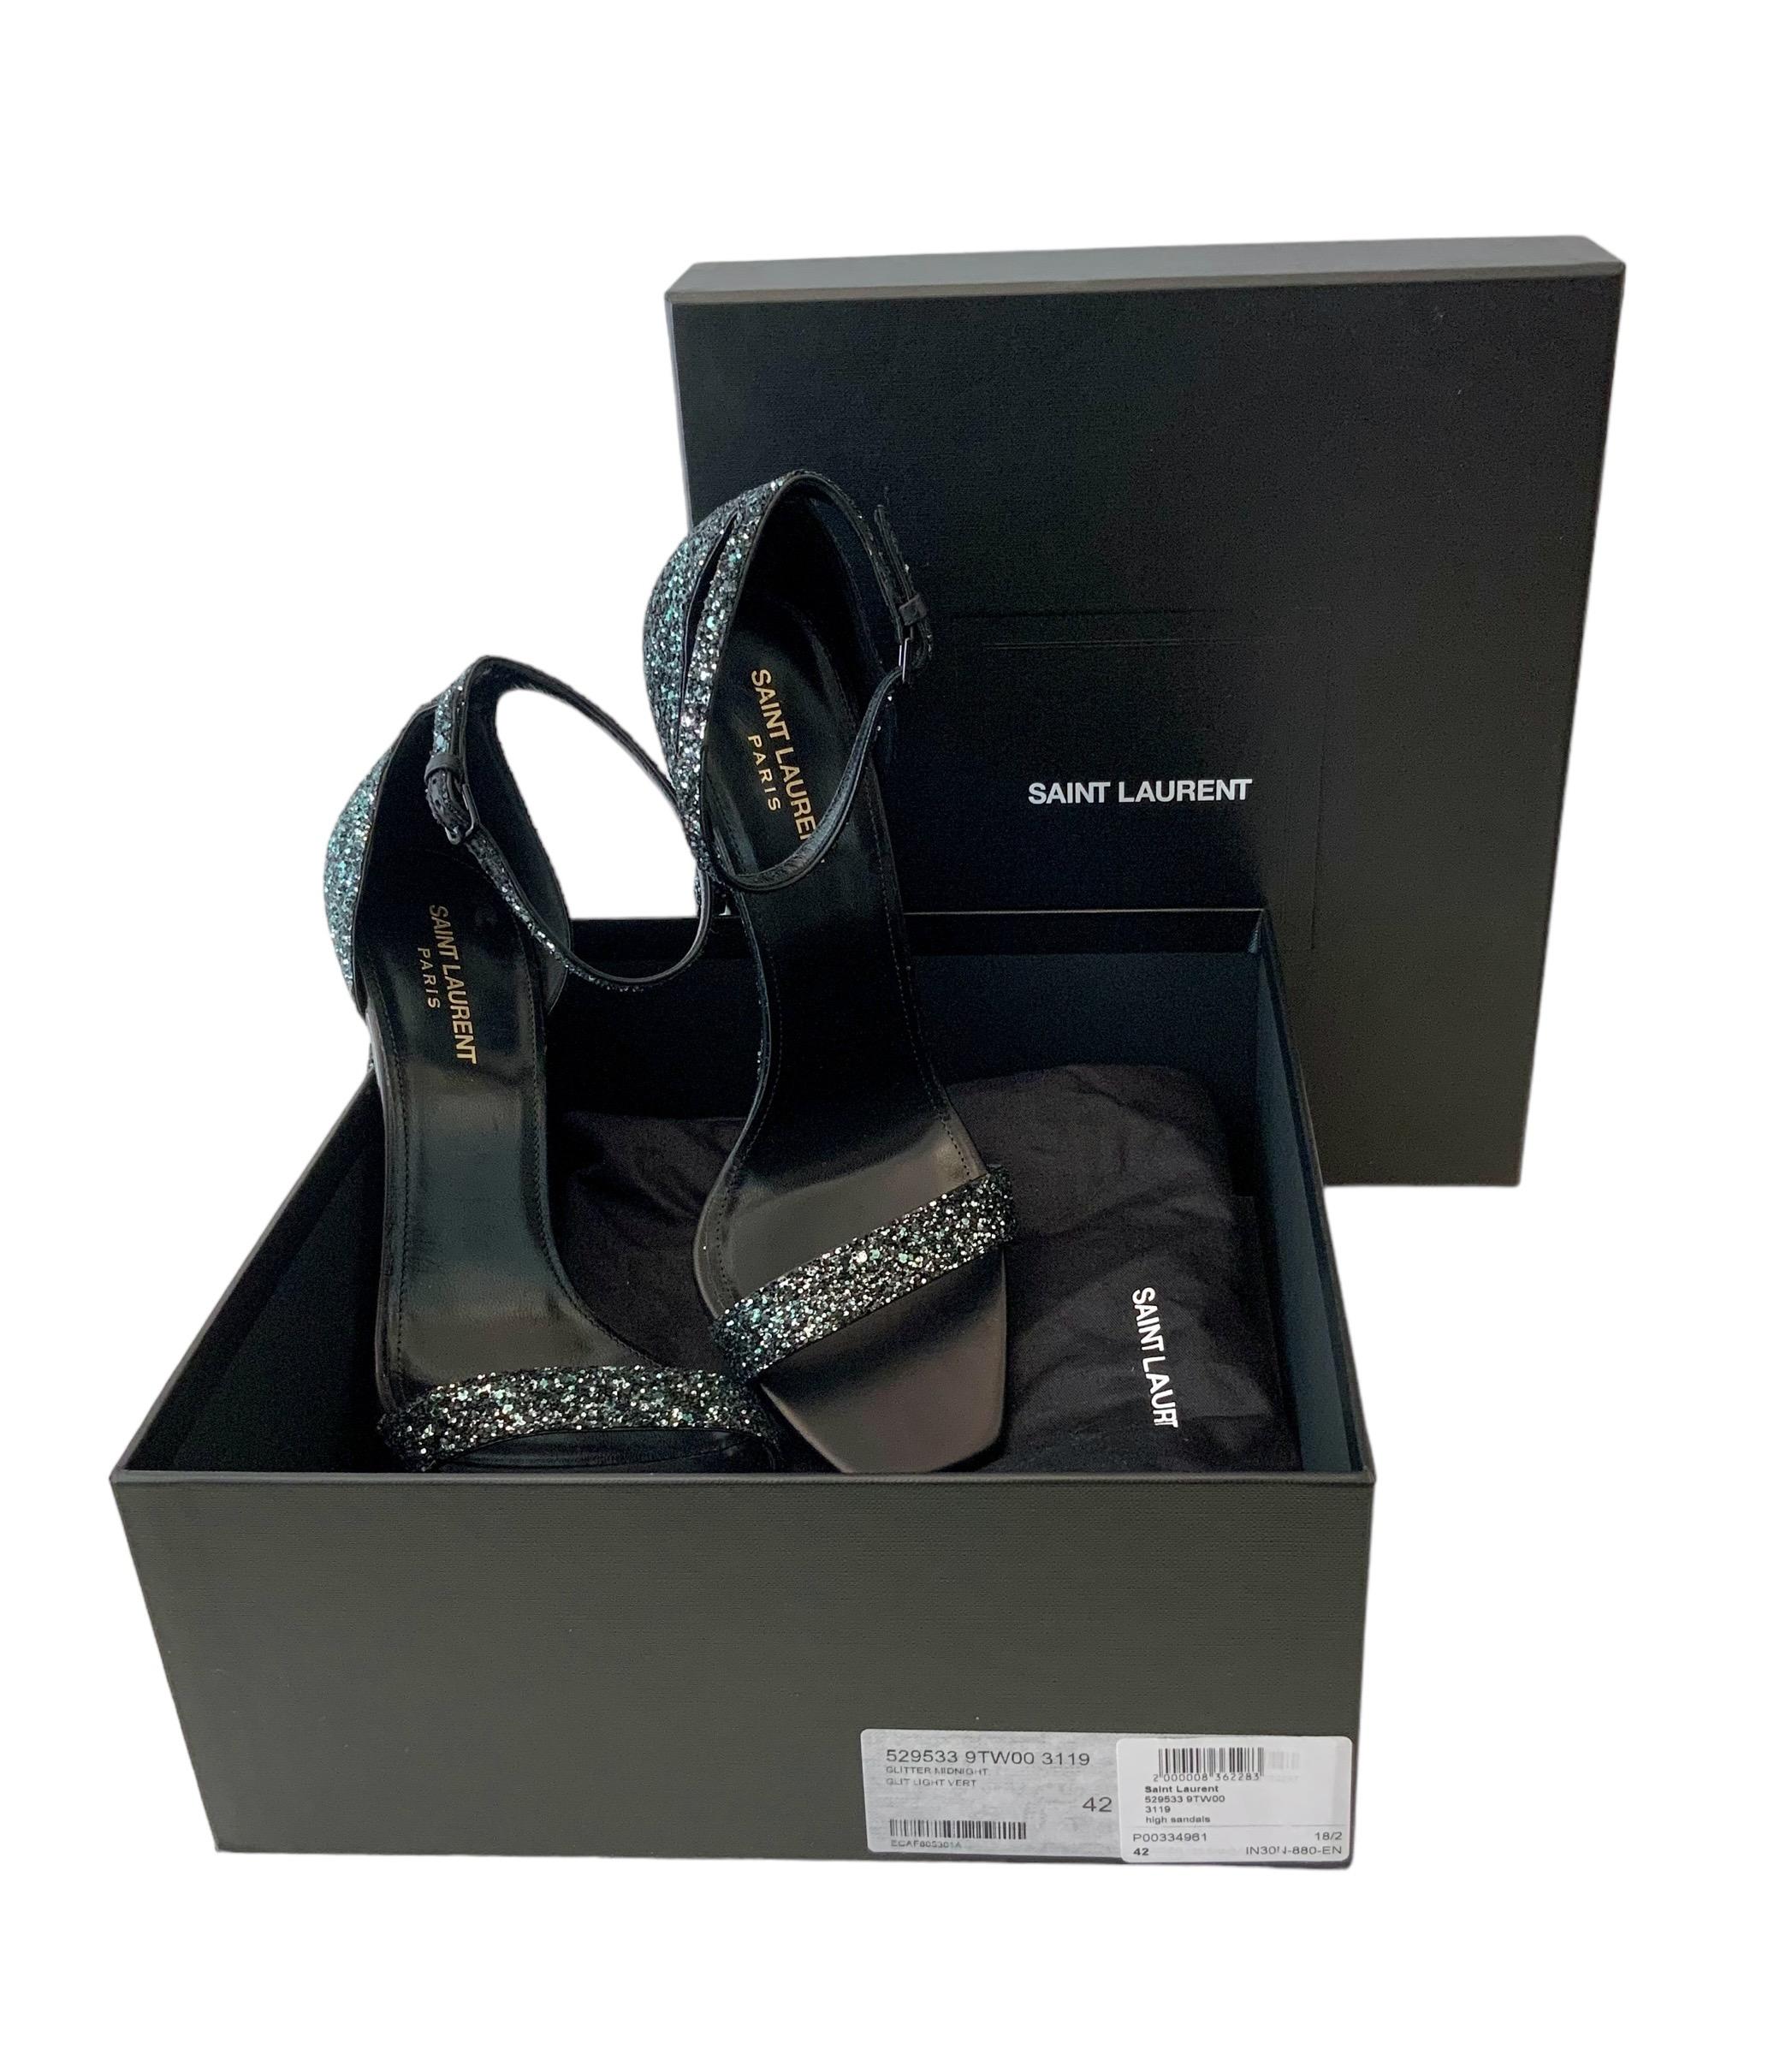 Amazing sandals now a classic from the house of Saint Laurent.
These pre-owned ones are as new as the owner wore them for 1 hour !!!!
They are crafted of black leather and green / blue glitter.
They feature an open toe, sleek ankle strap with a side